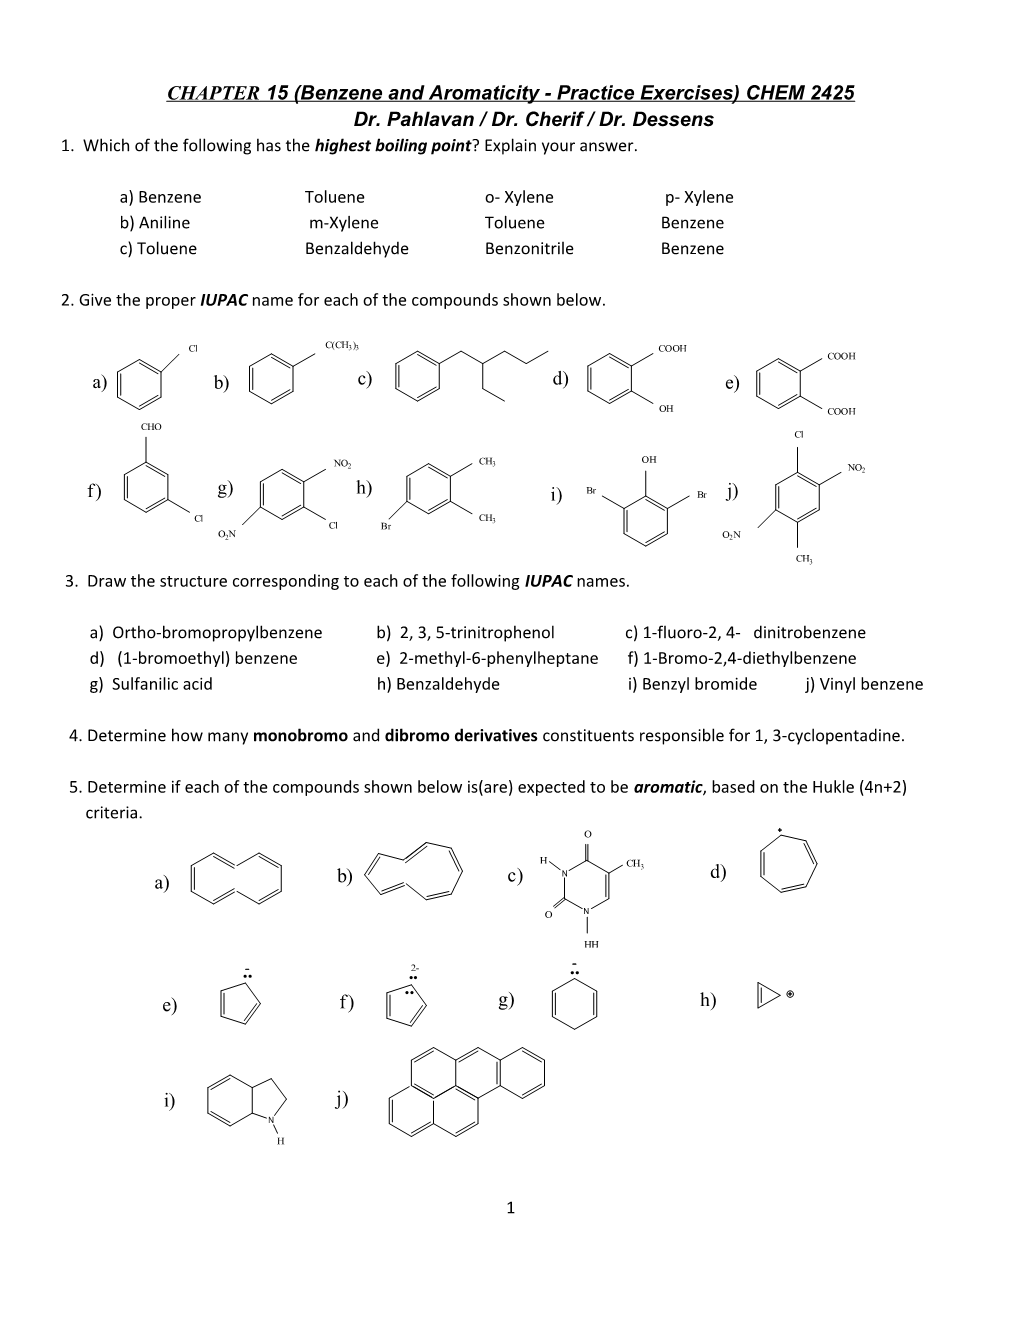 CHAPTER 15(Benzene and Aromaticity - Practice Exercises) CHEM 2425 Dr. Pahlavan / Dr. Cherif